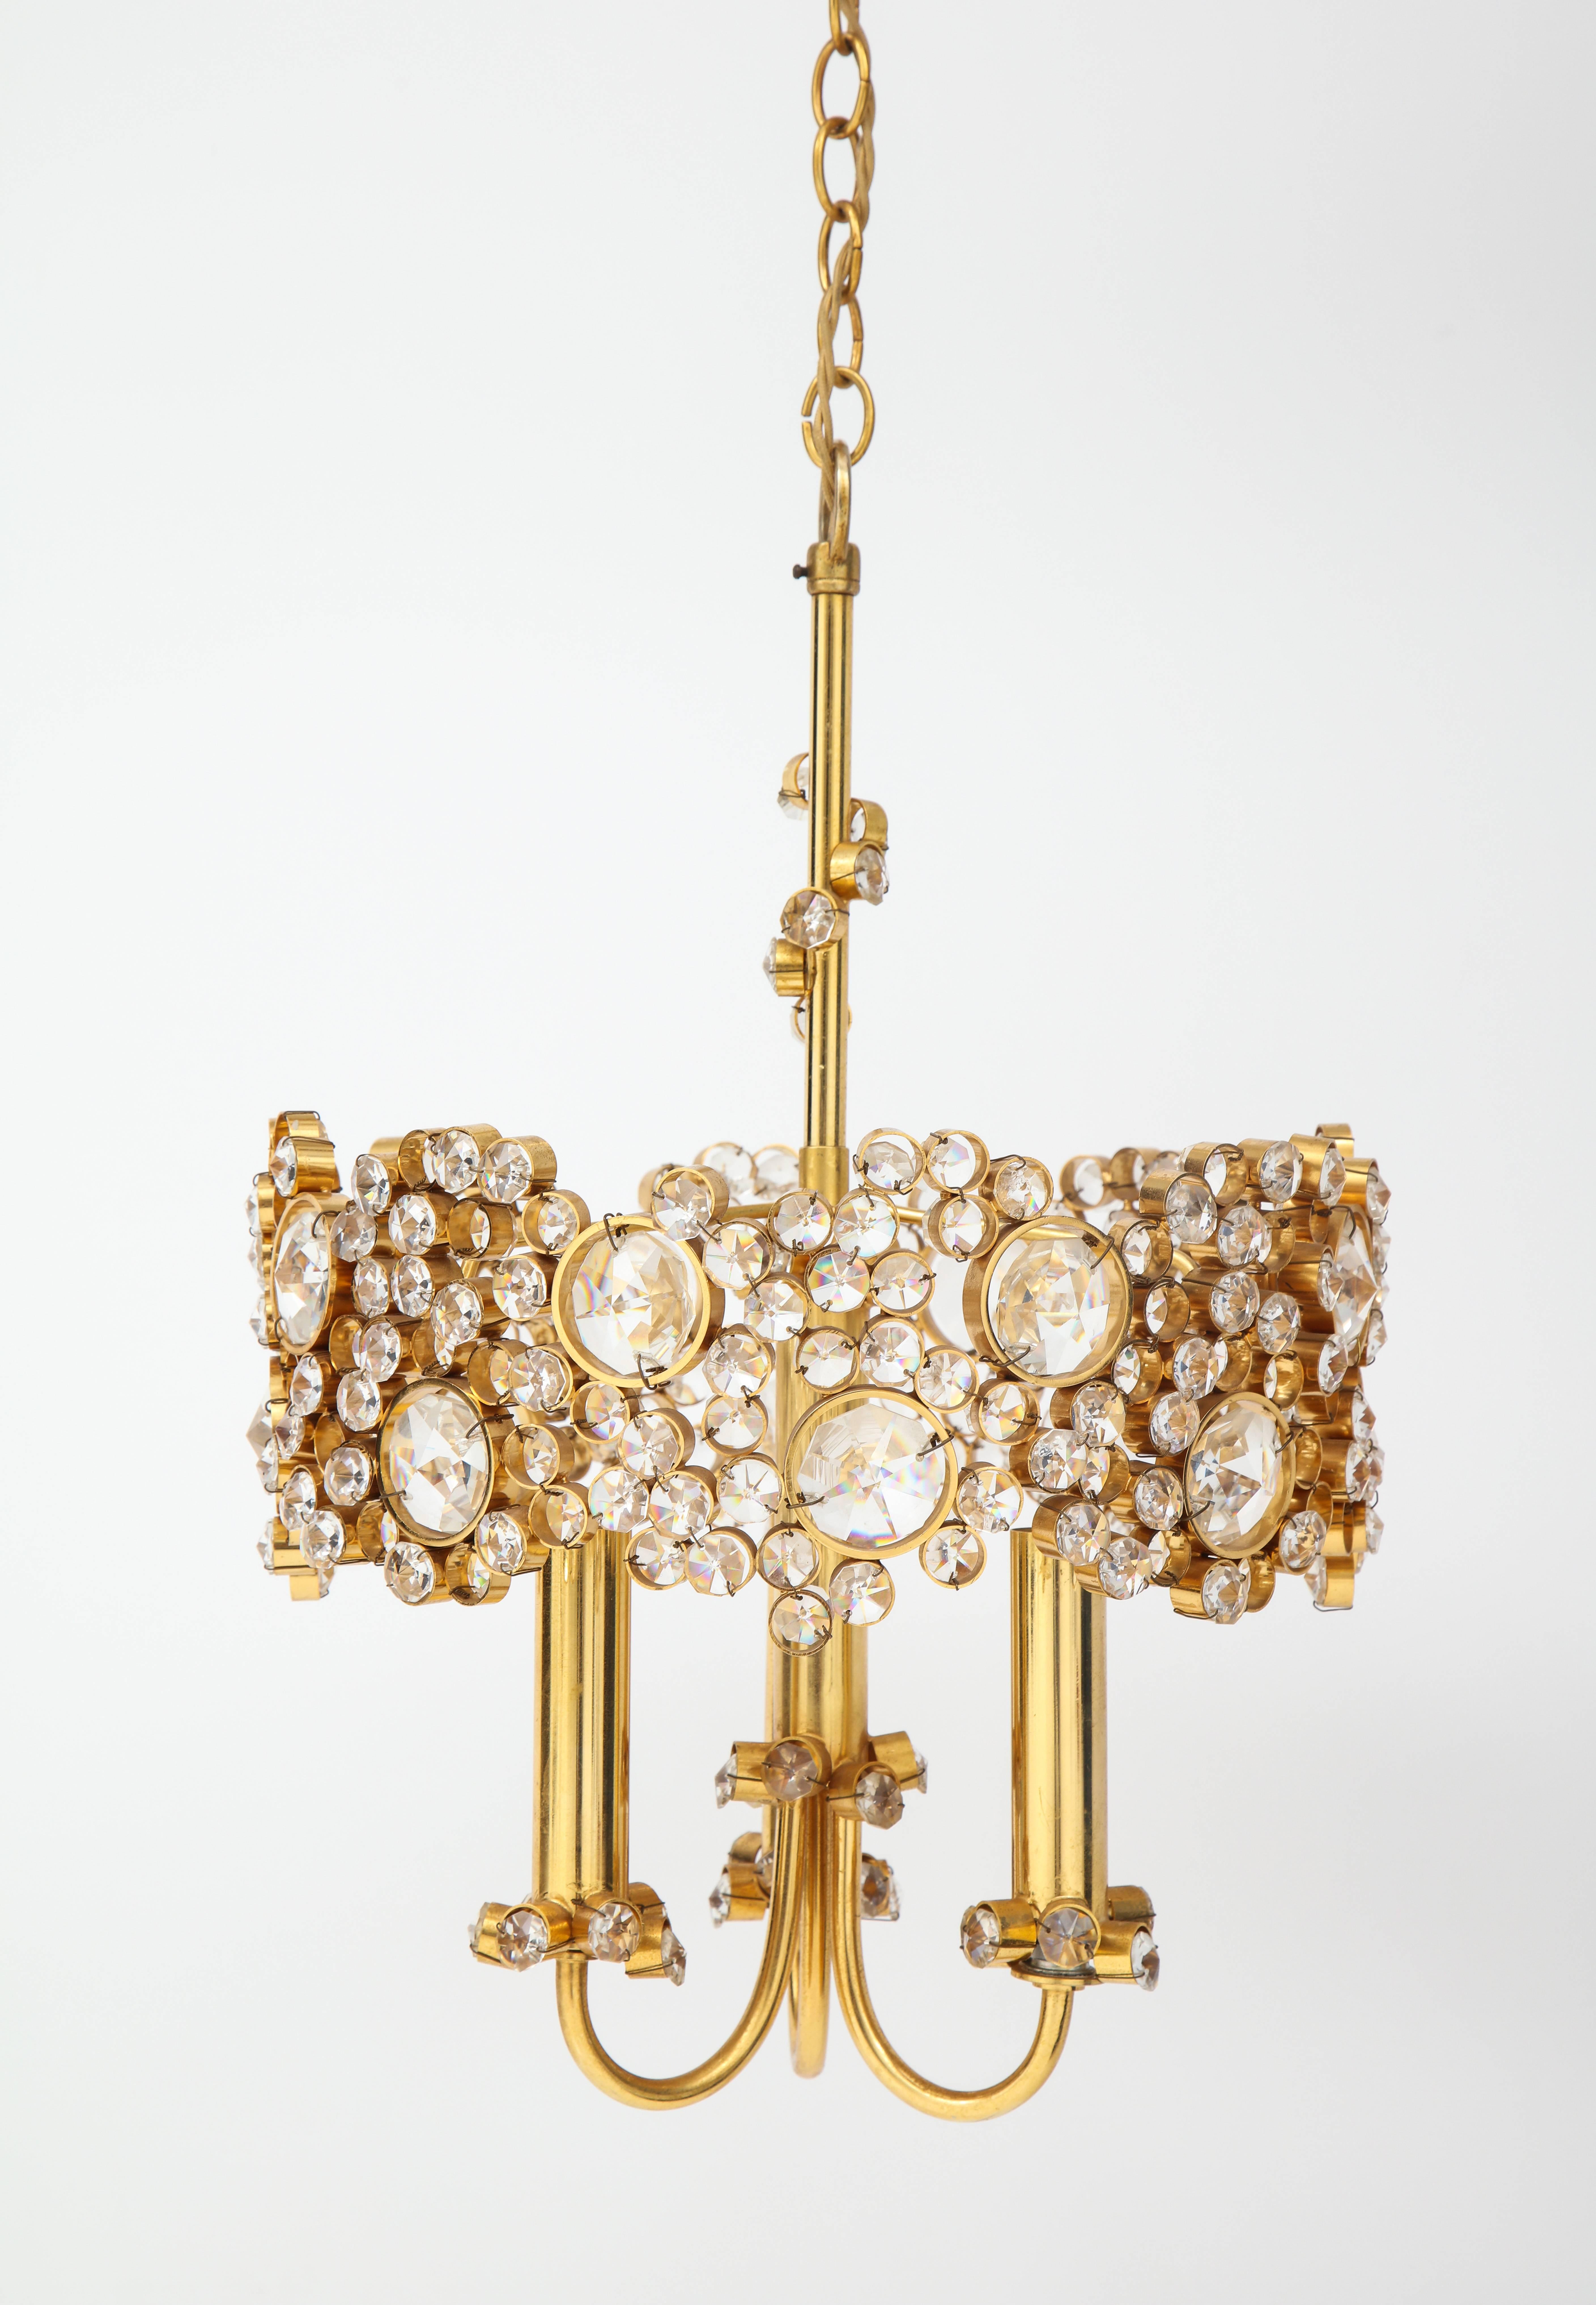 A gold-plated and faceted crystal chandelier with a central stem with climbing crystals and three gold plated arms decorated with crystals at the base. A jewel like piece, the crystals of varying sizes and shapes will provide beautiful light in any